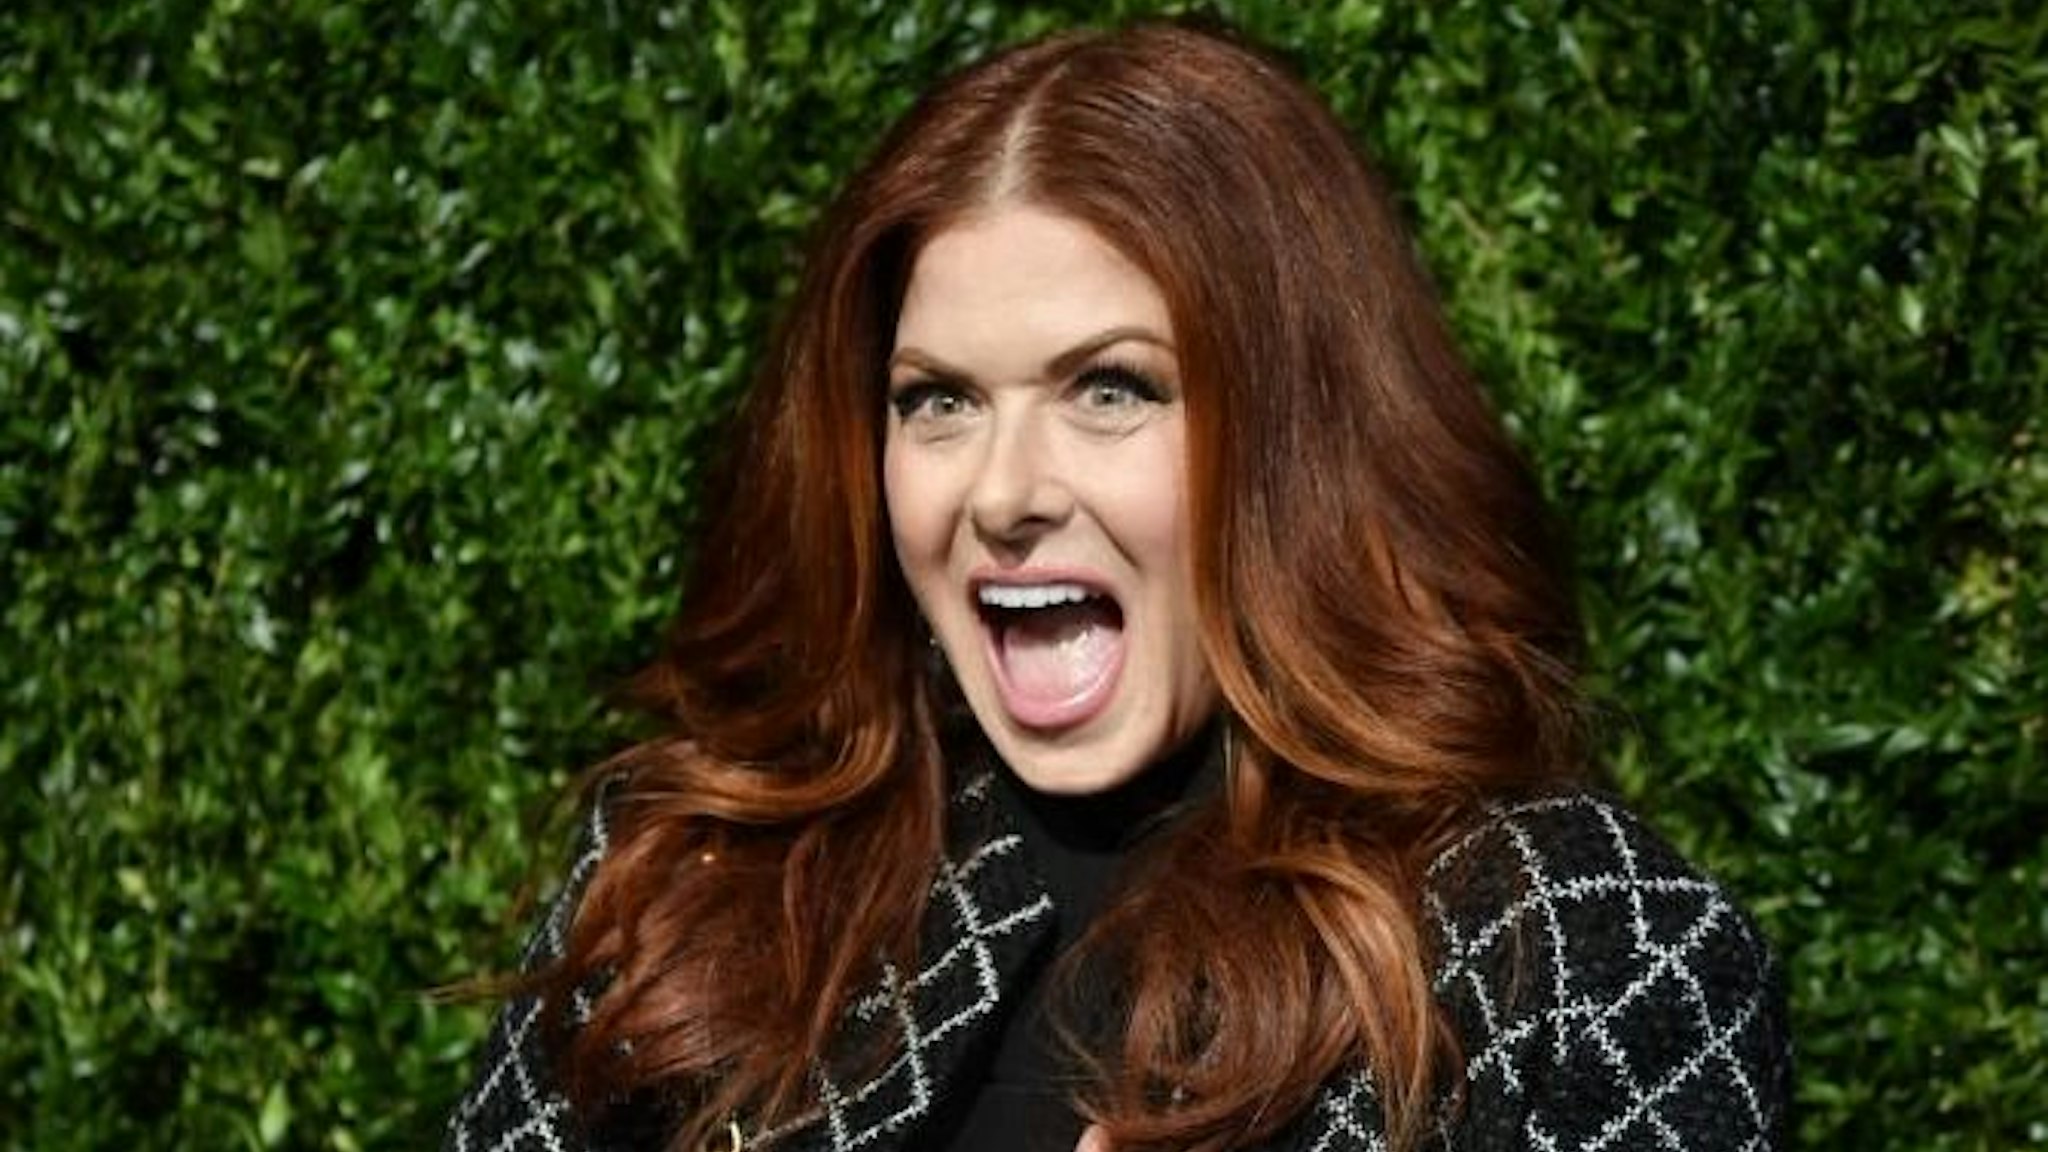 US actress Debra Messing arrives for the 14th Annual Tribeca Film Festival Artists Dinner hosted by Chanel at Balthazar restaurant on April 29, 2019 in New York.